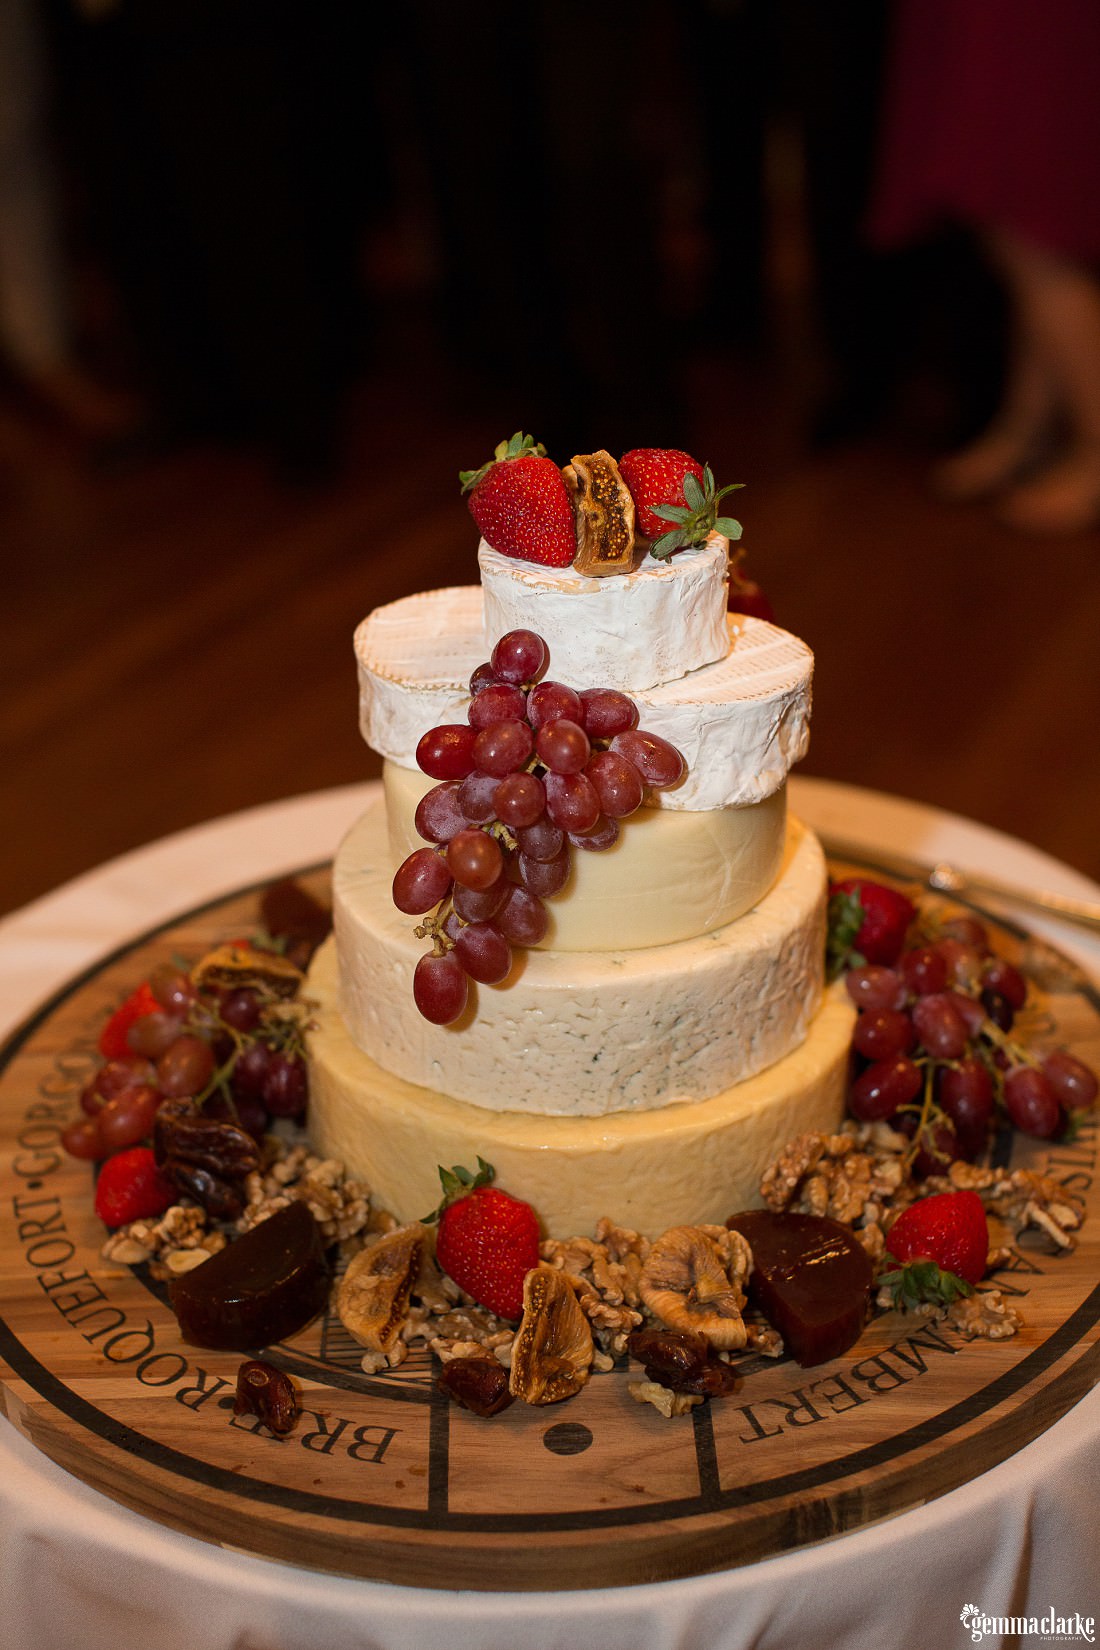 A five tier cheese "cake" dressed with fruit - Rainy Athol Hall Wedding